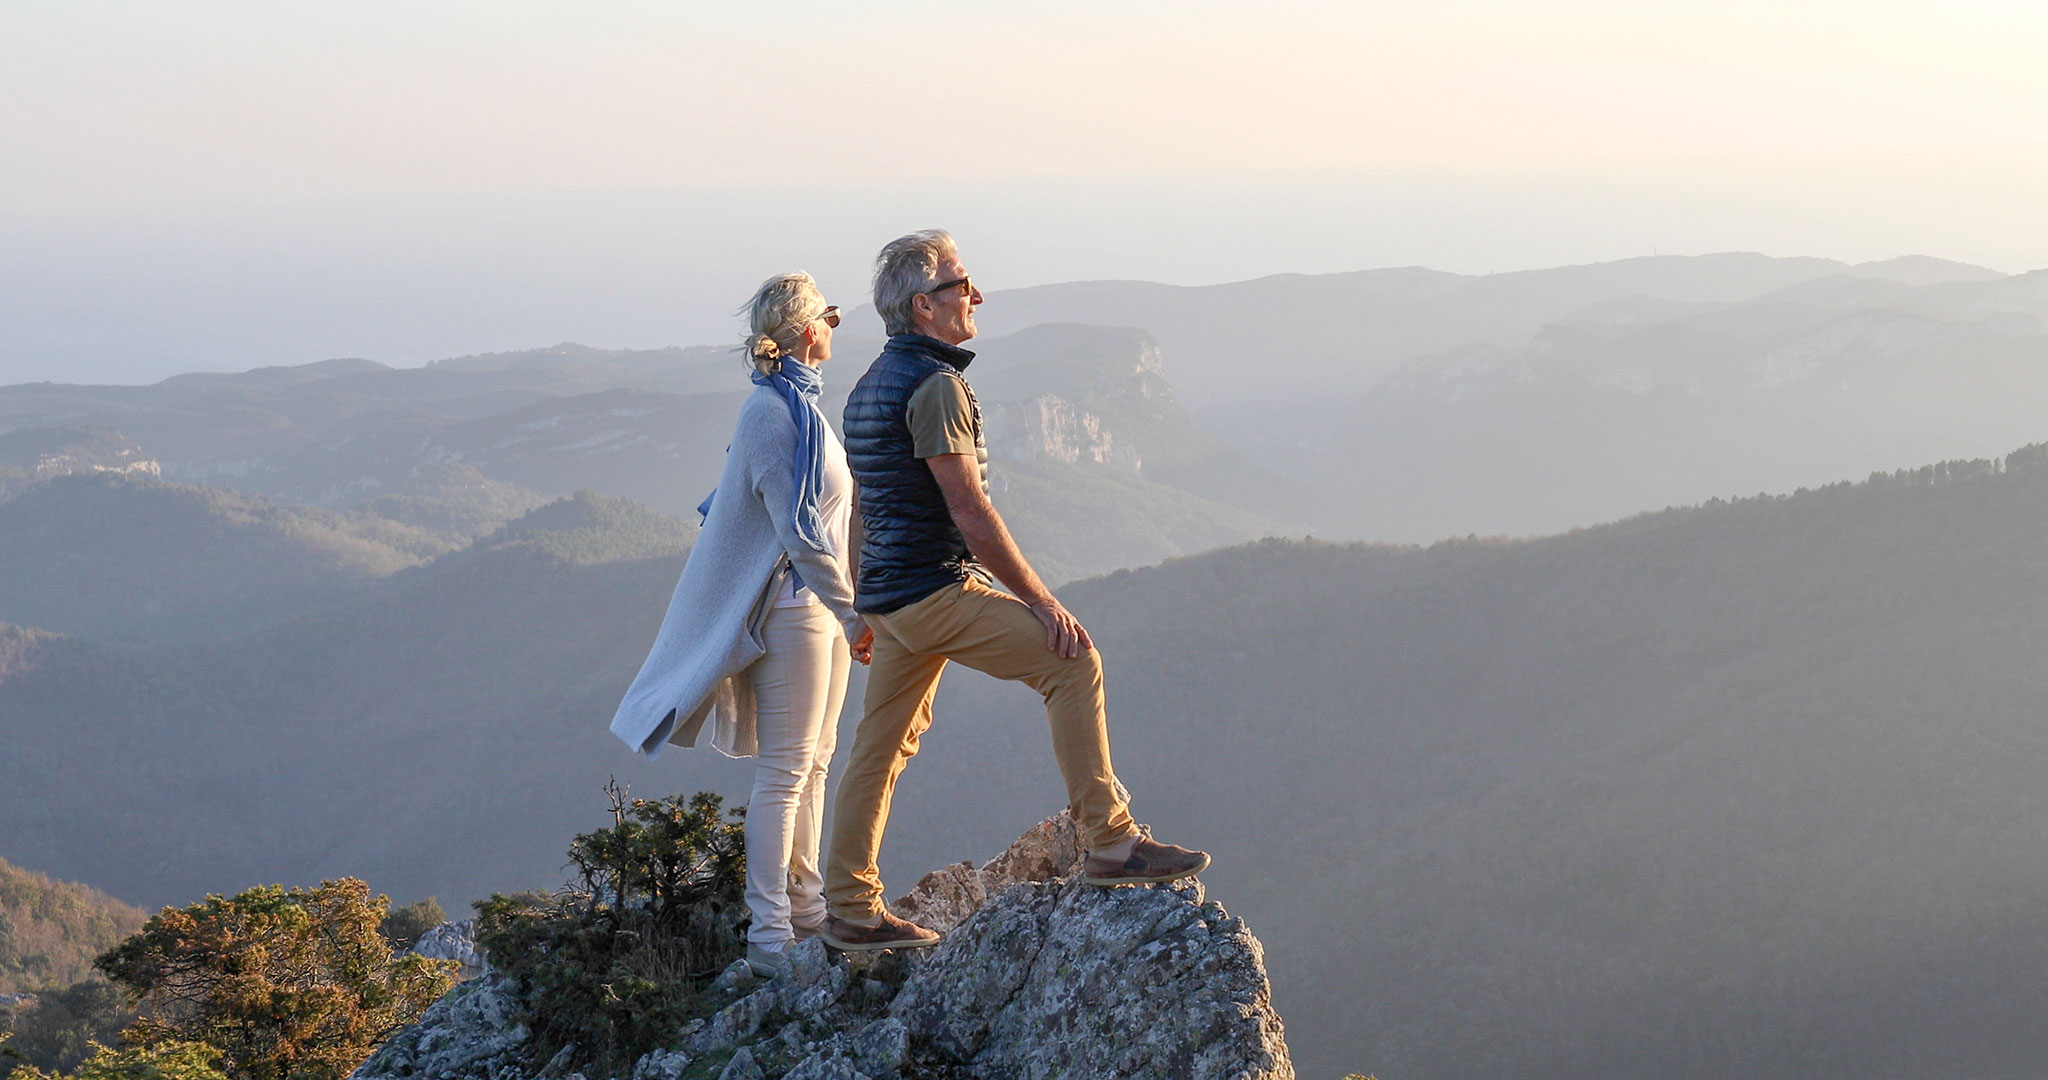 A senior couple stands on a rock overlooking distant mountains.